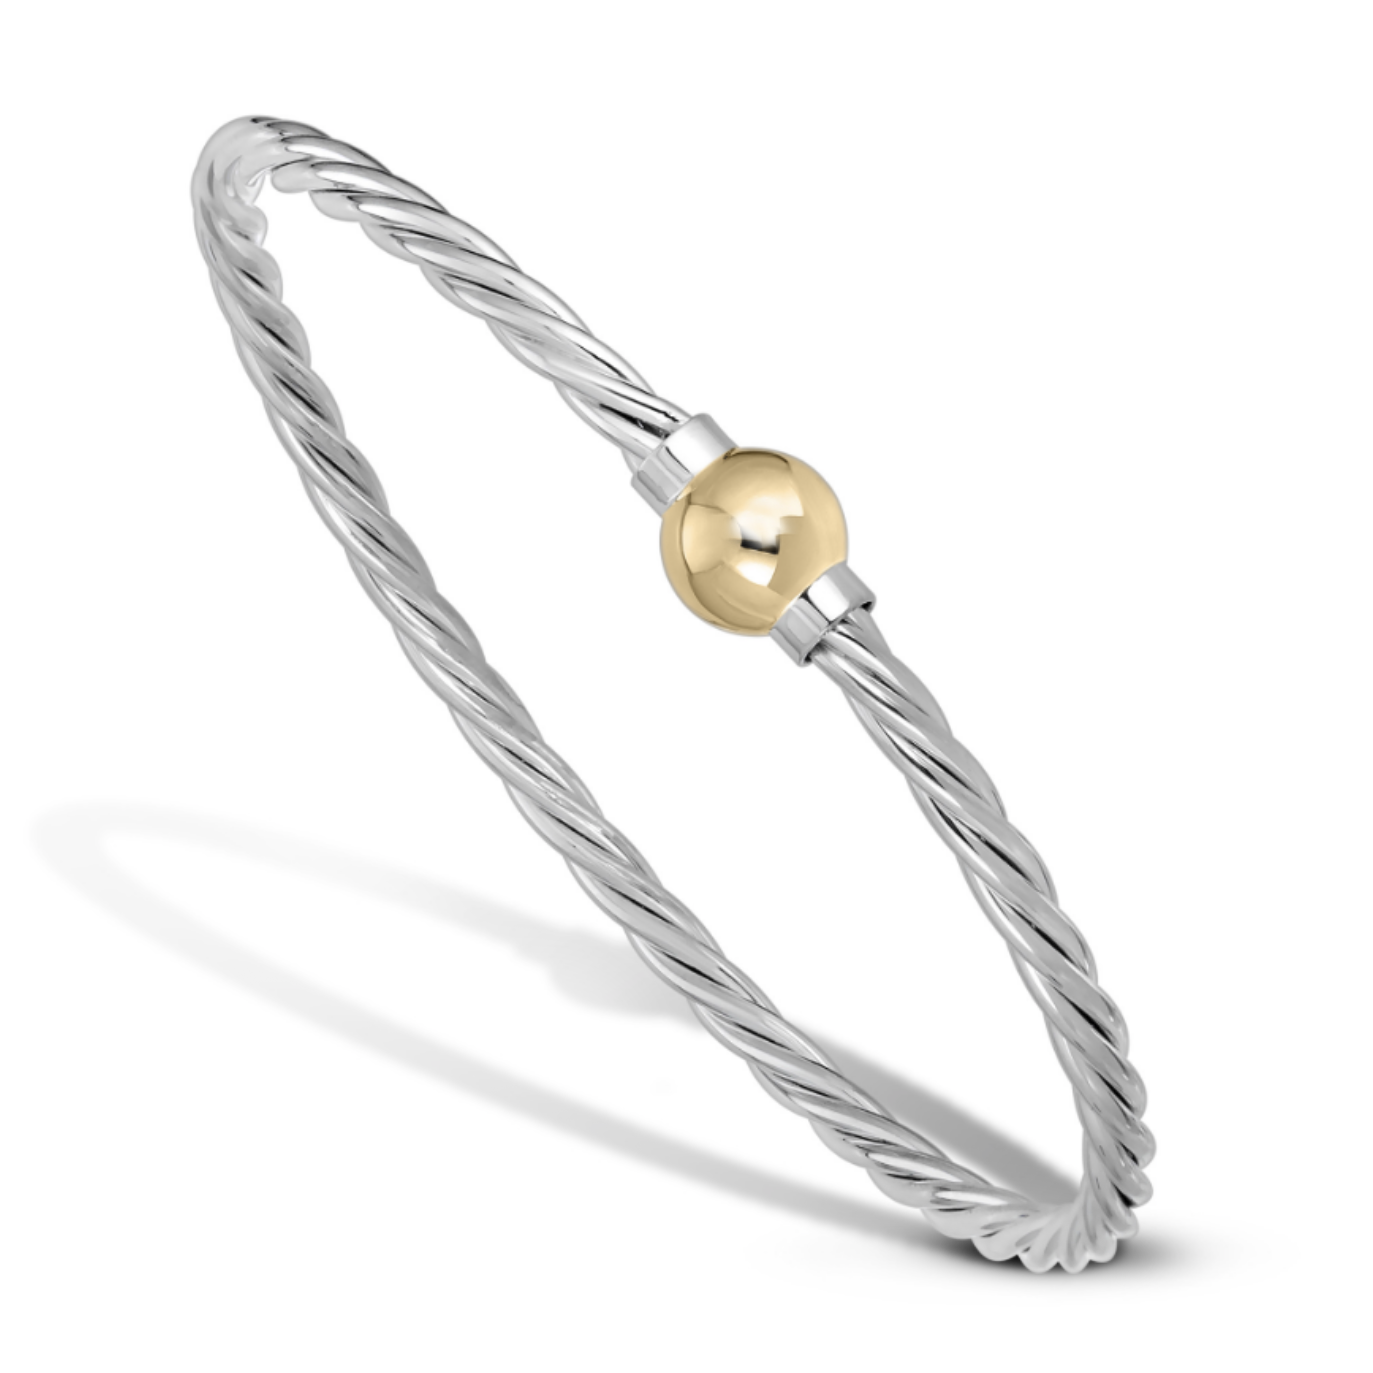 LeStage Cape Cod Cuff bracelet - sterling silver and 14K gold – Butterfly  Beach Jewelers